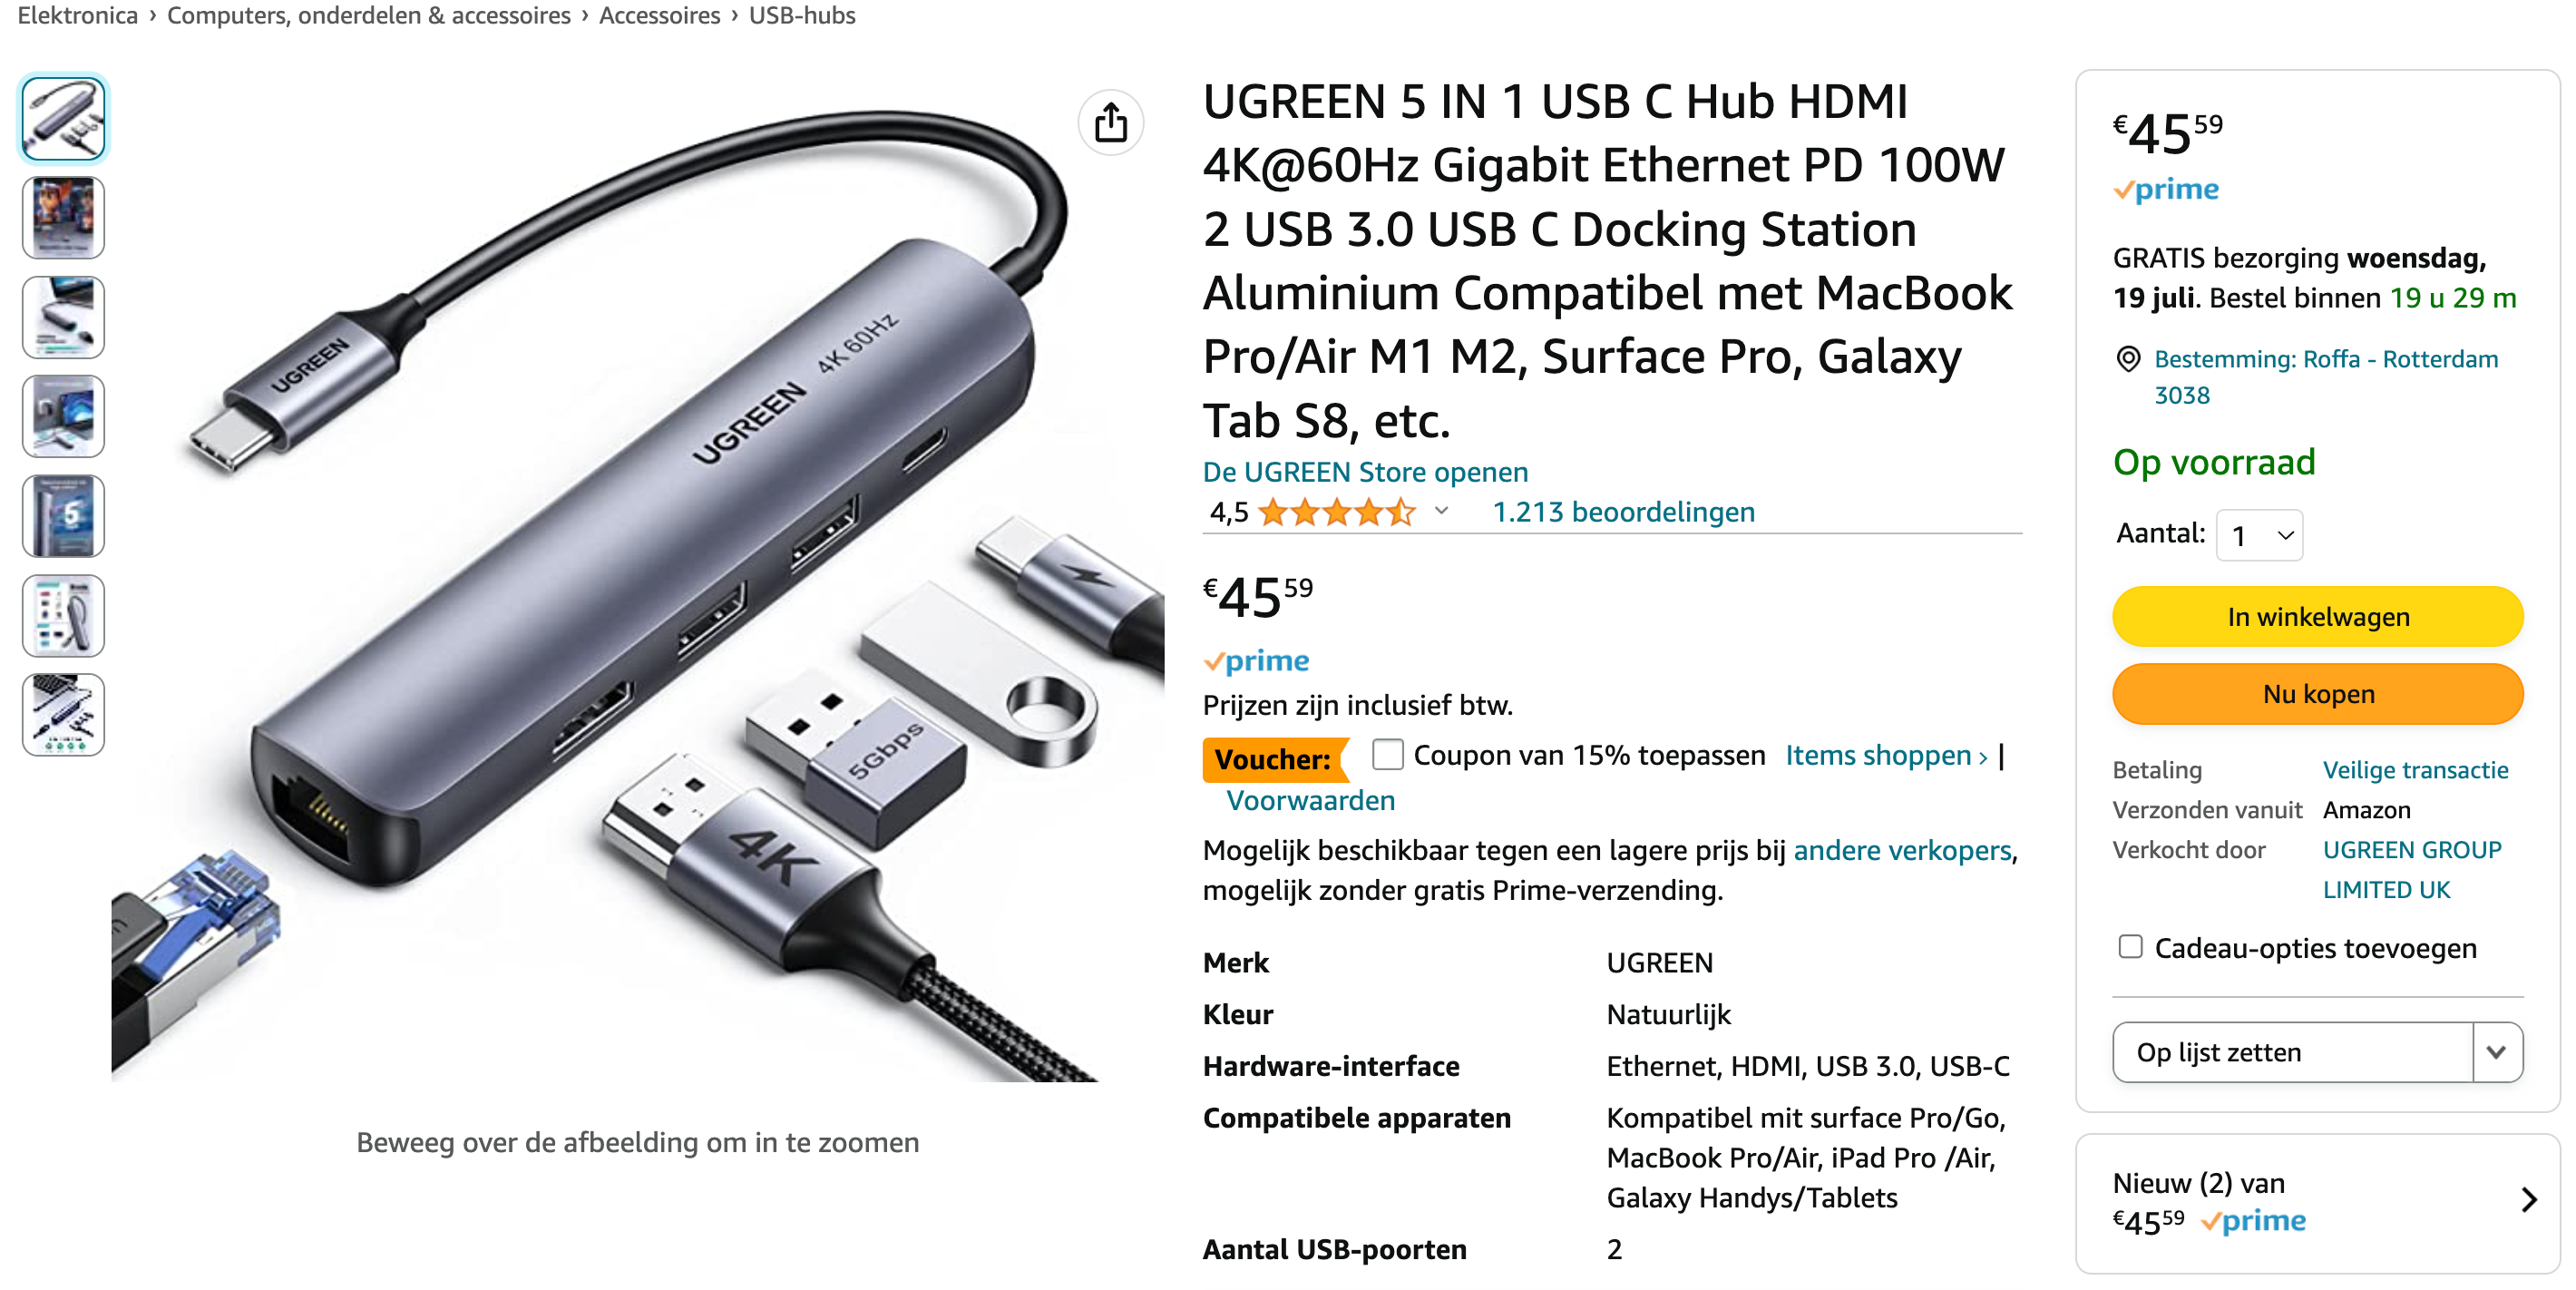 What to do when the USB-C ethernet adapter for your Mac doesn't